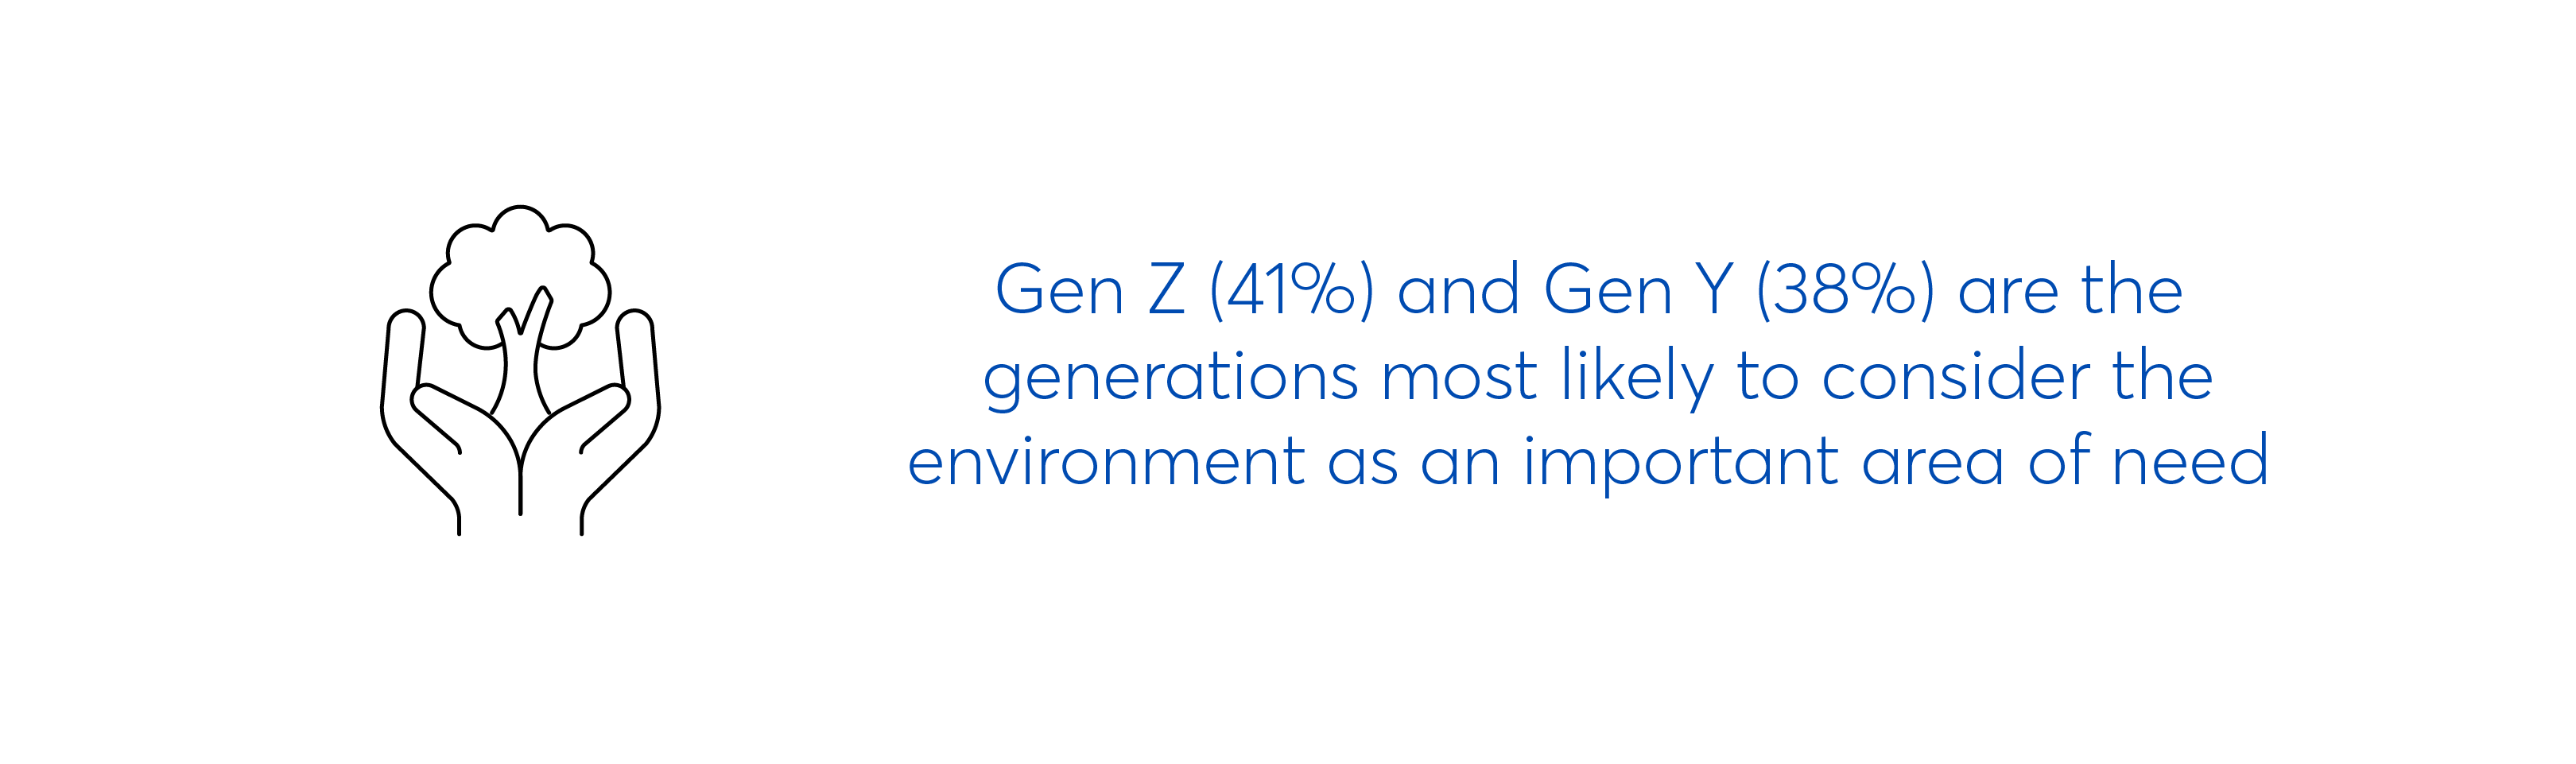 Gen Z and Gen Y are most likely to consider the environment